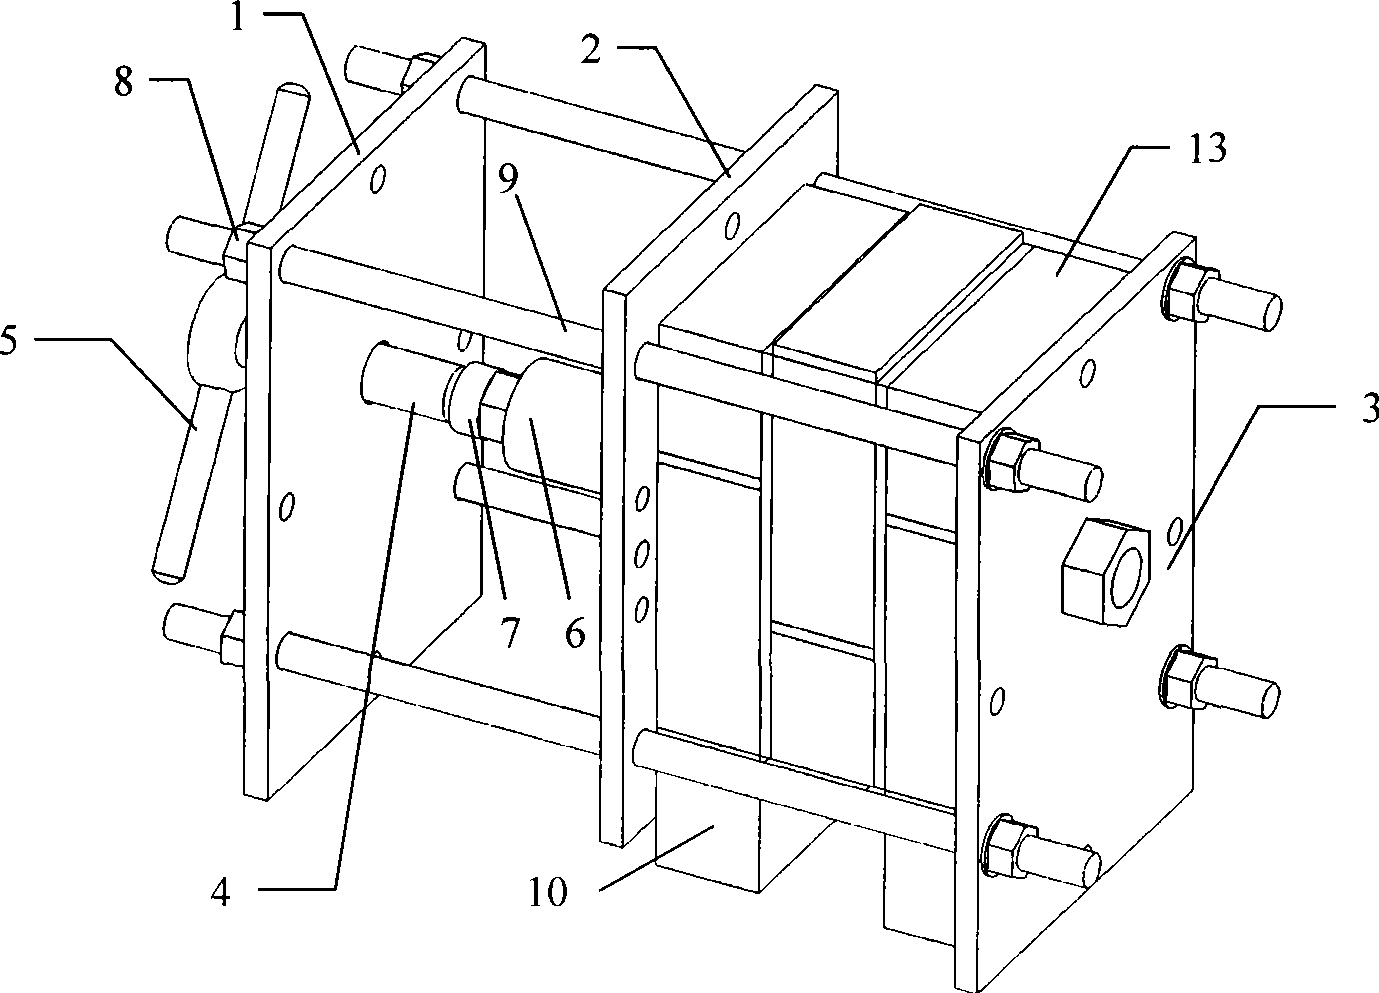 Bidirectional composite force loading test device for masonry test piece